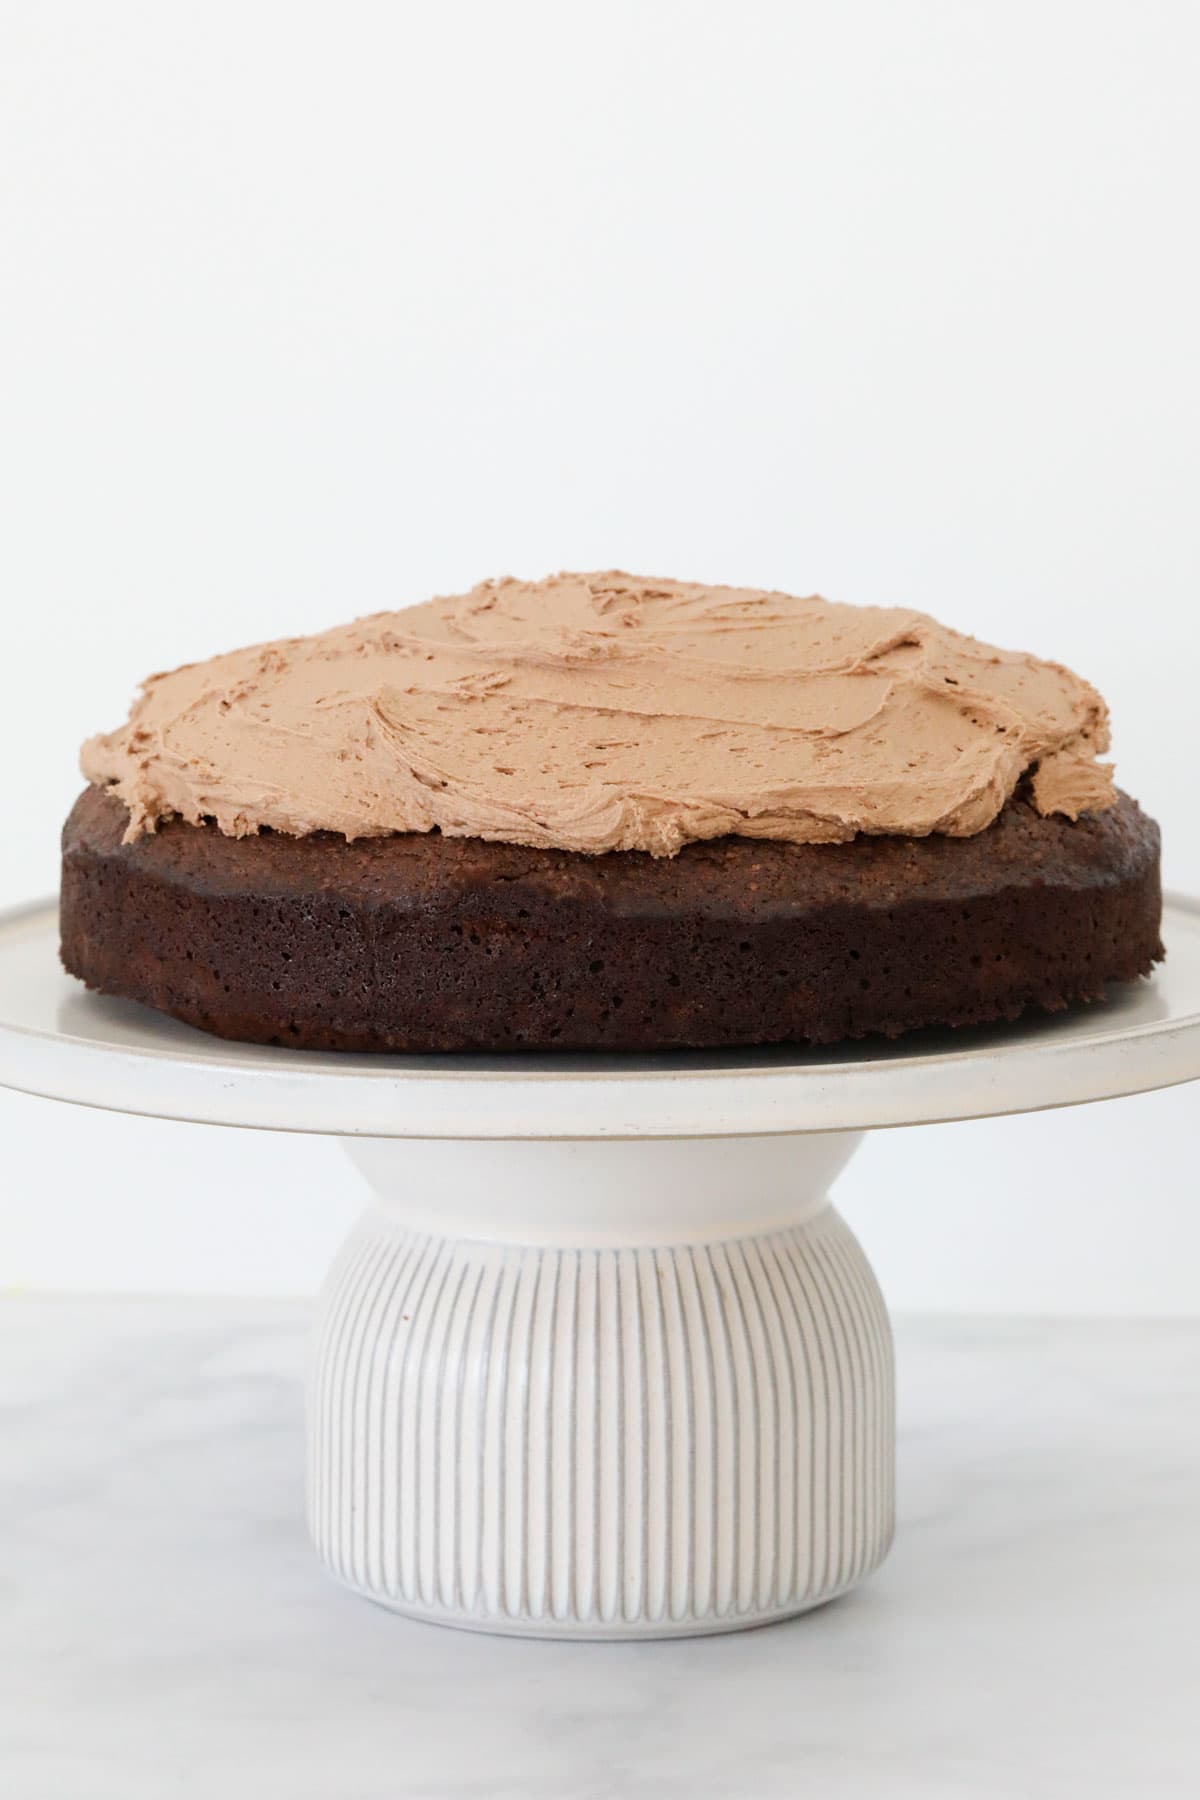 A chocolate cake topped with the chocolate buttercream icing.